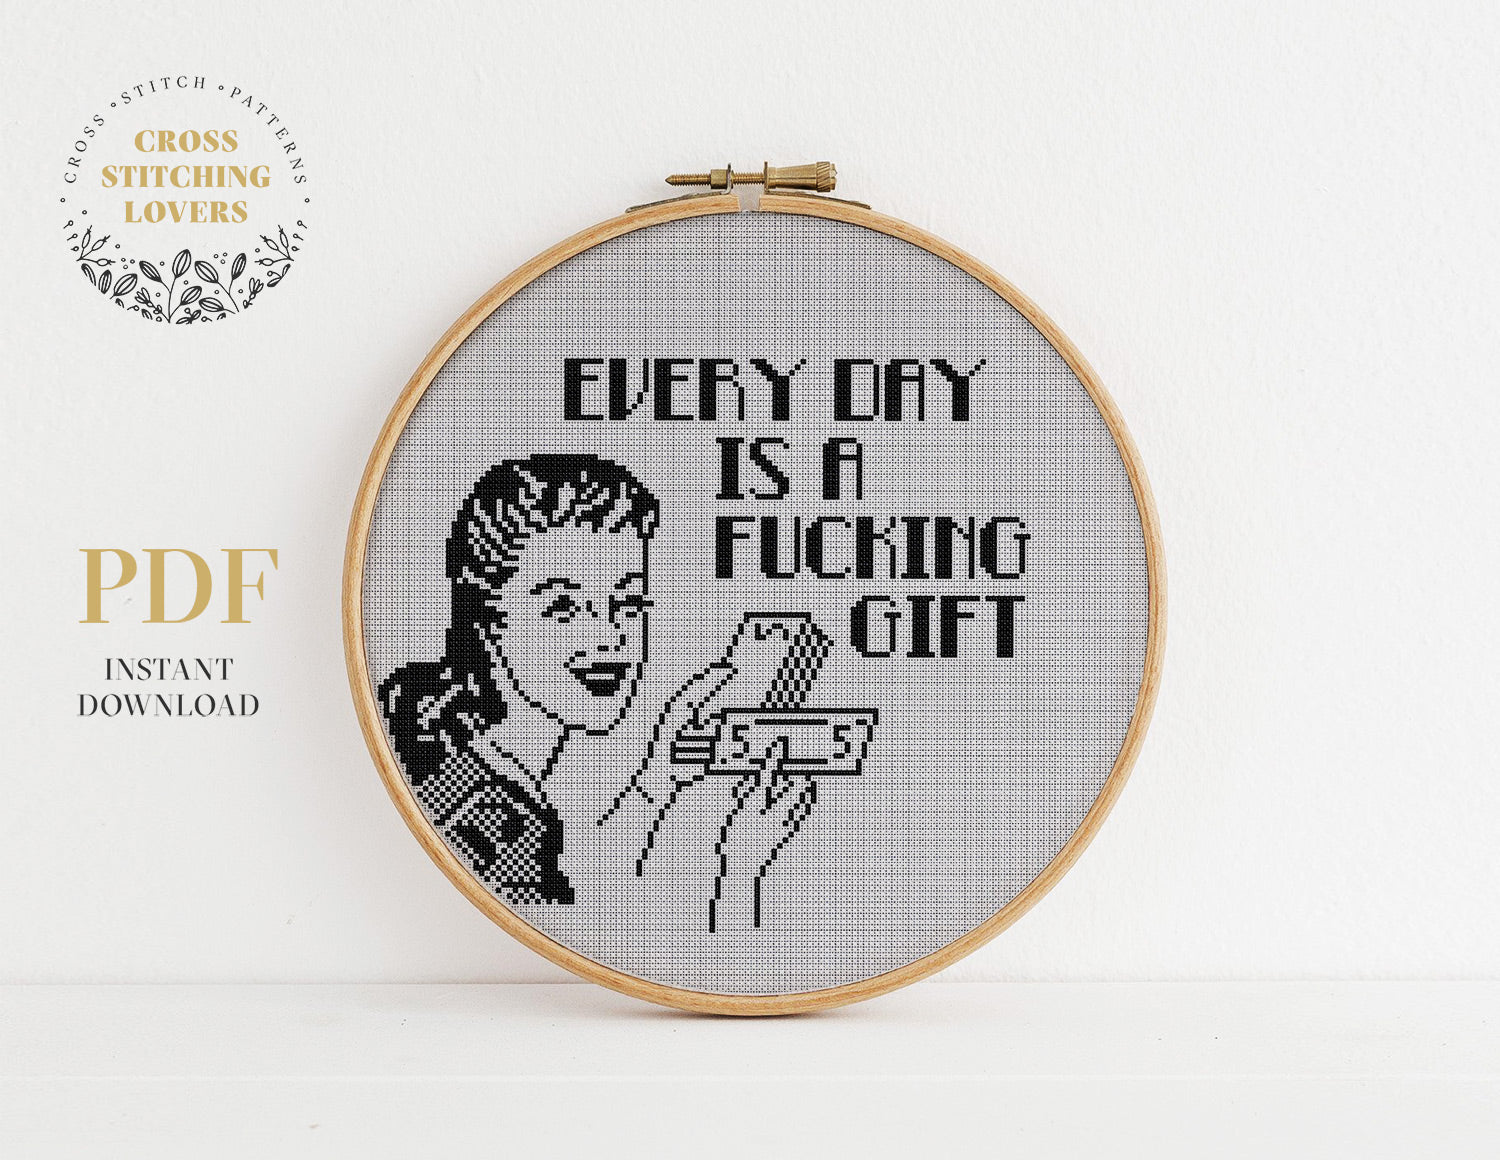 EVERY DAY IS A FUCKING GIFT - Cross stitch pattern